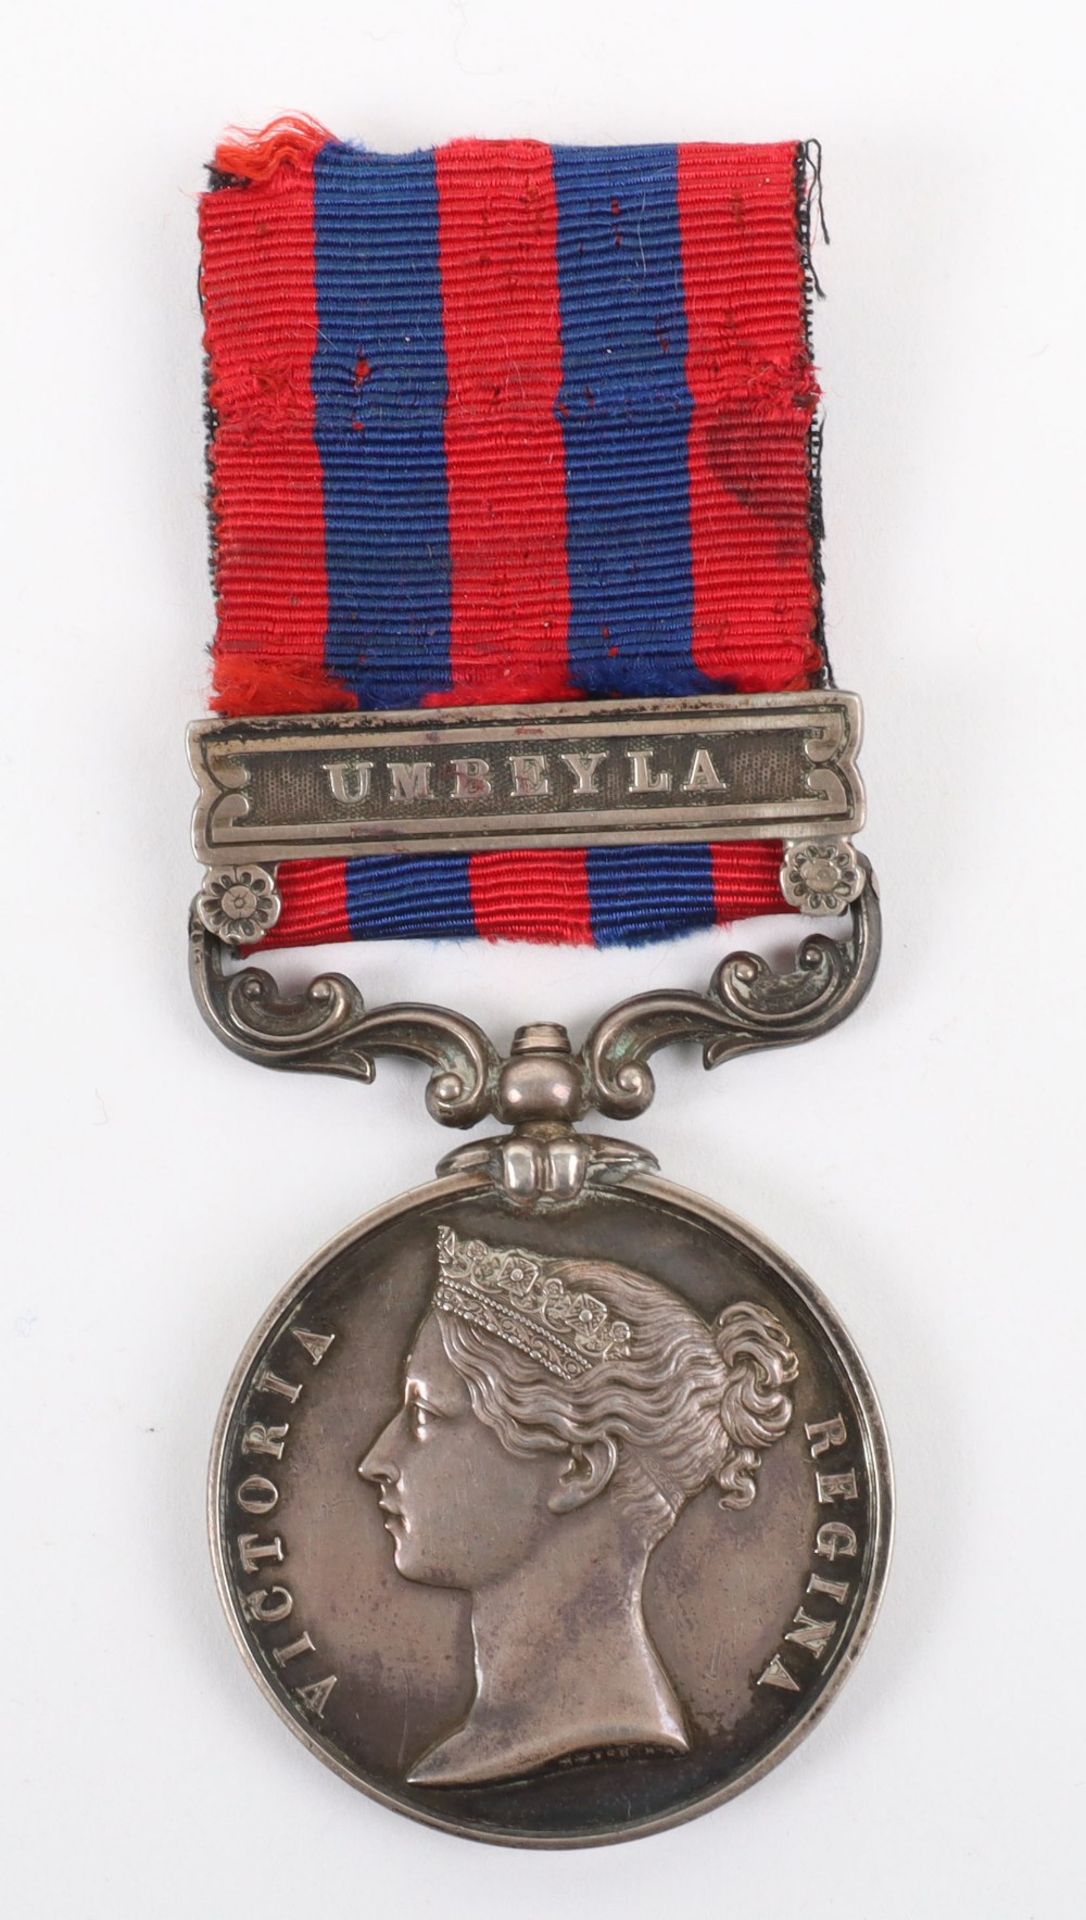 India General Service medal 1854-95 For Service in the 1863 Umbeyla Campaign